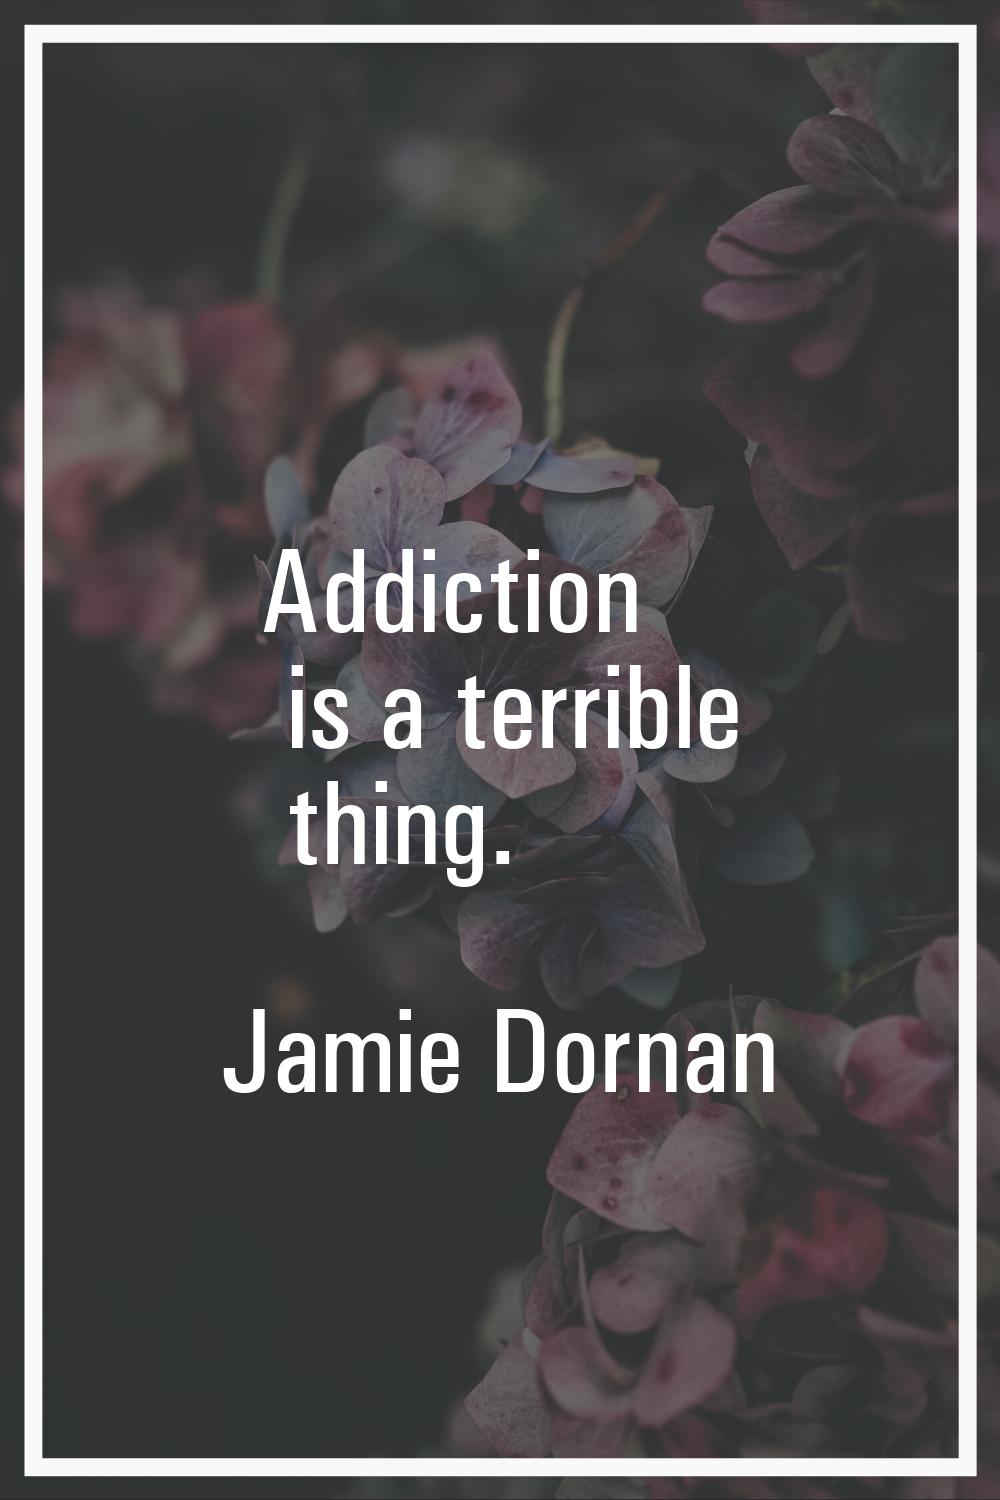 Addiction is a terrible thing.